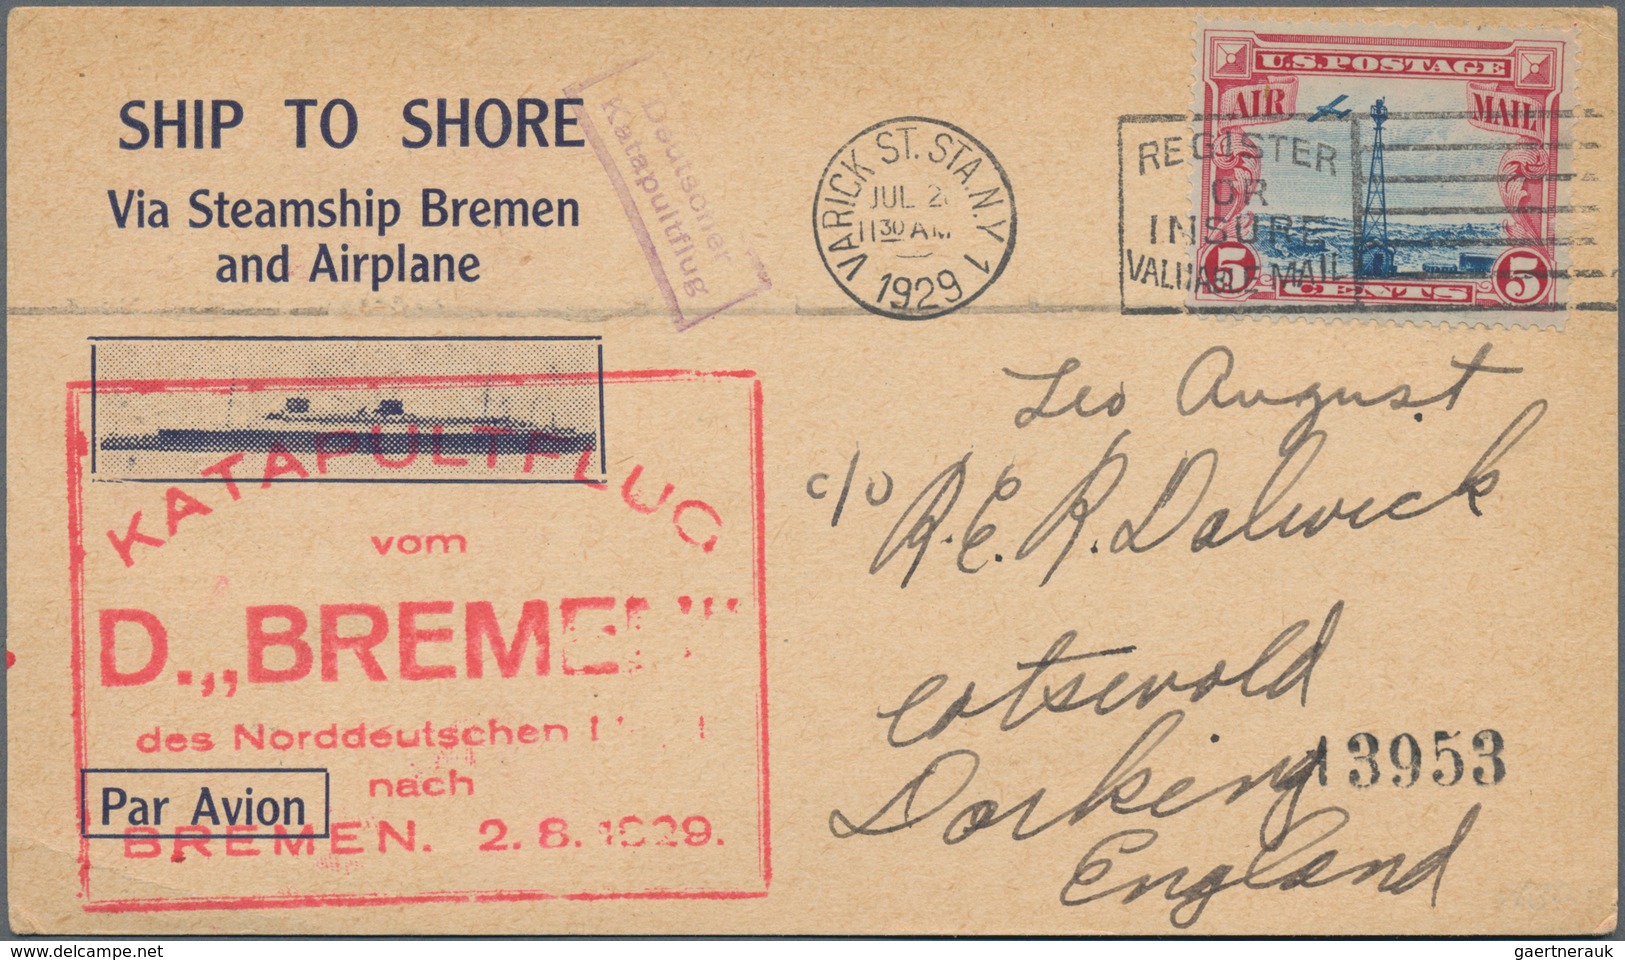 Vereinigte Staaten von Amerika: 1854-1950's ca.: More than 60 covers, postcards and postal stationer